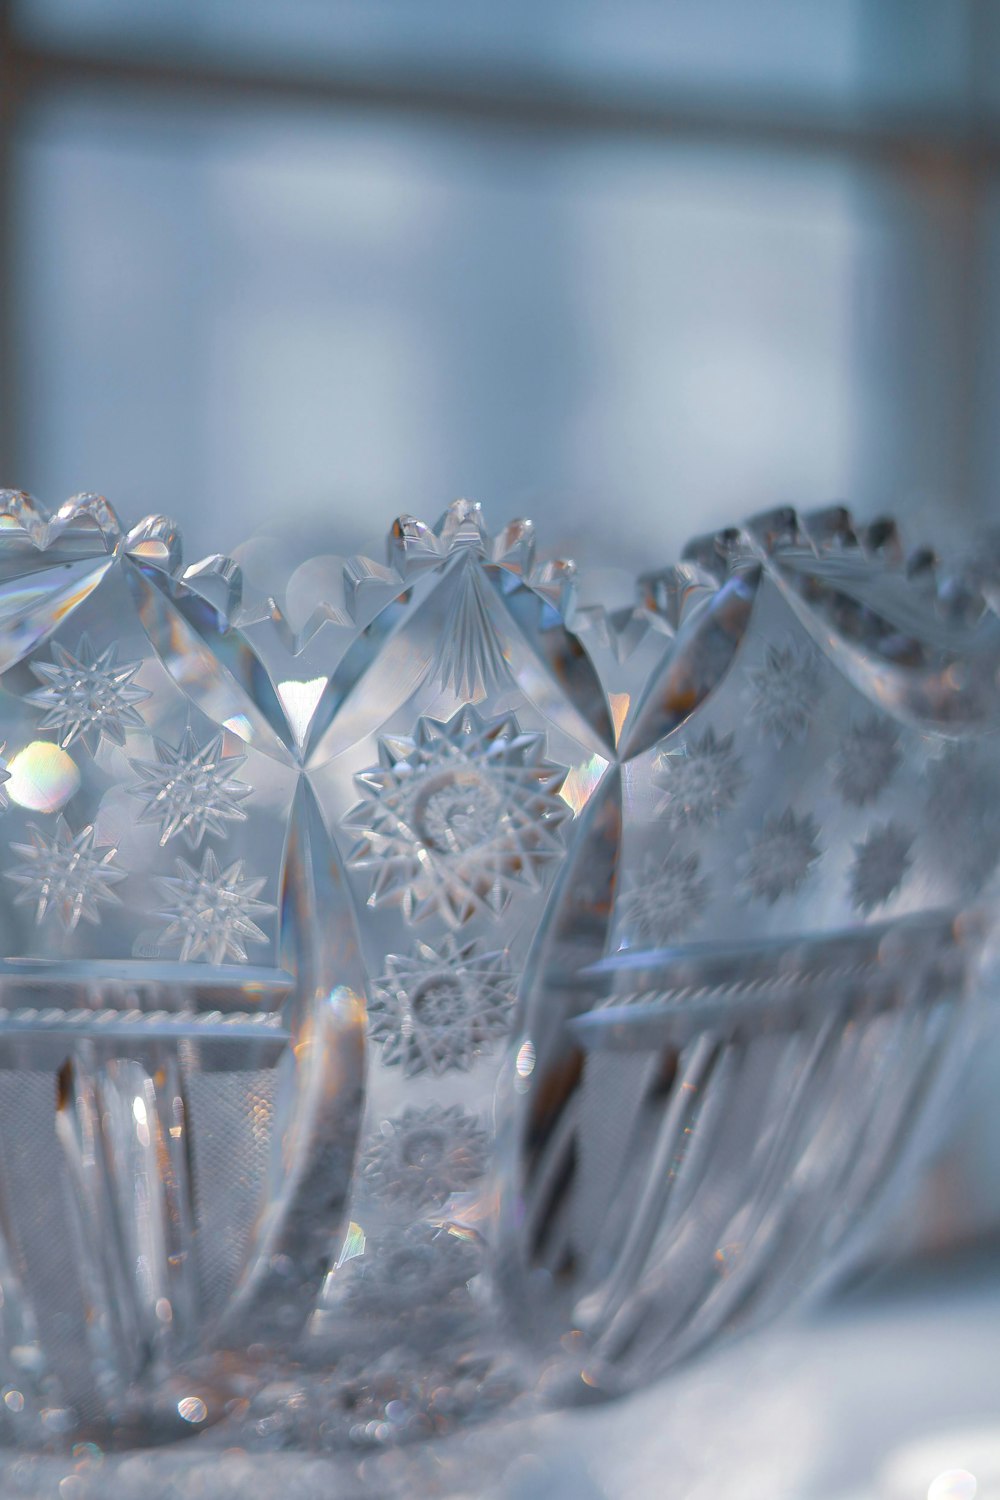 a clear glass bowl with snowflakes on it